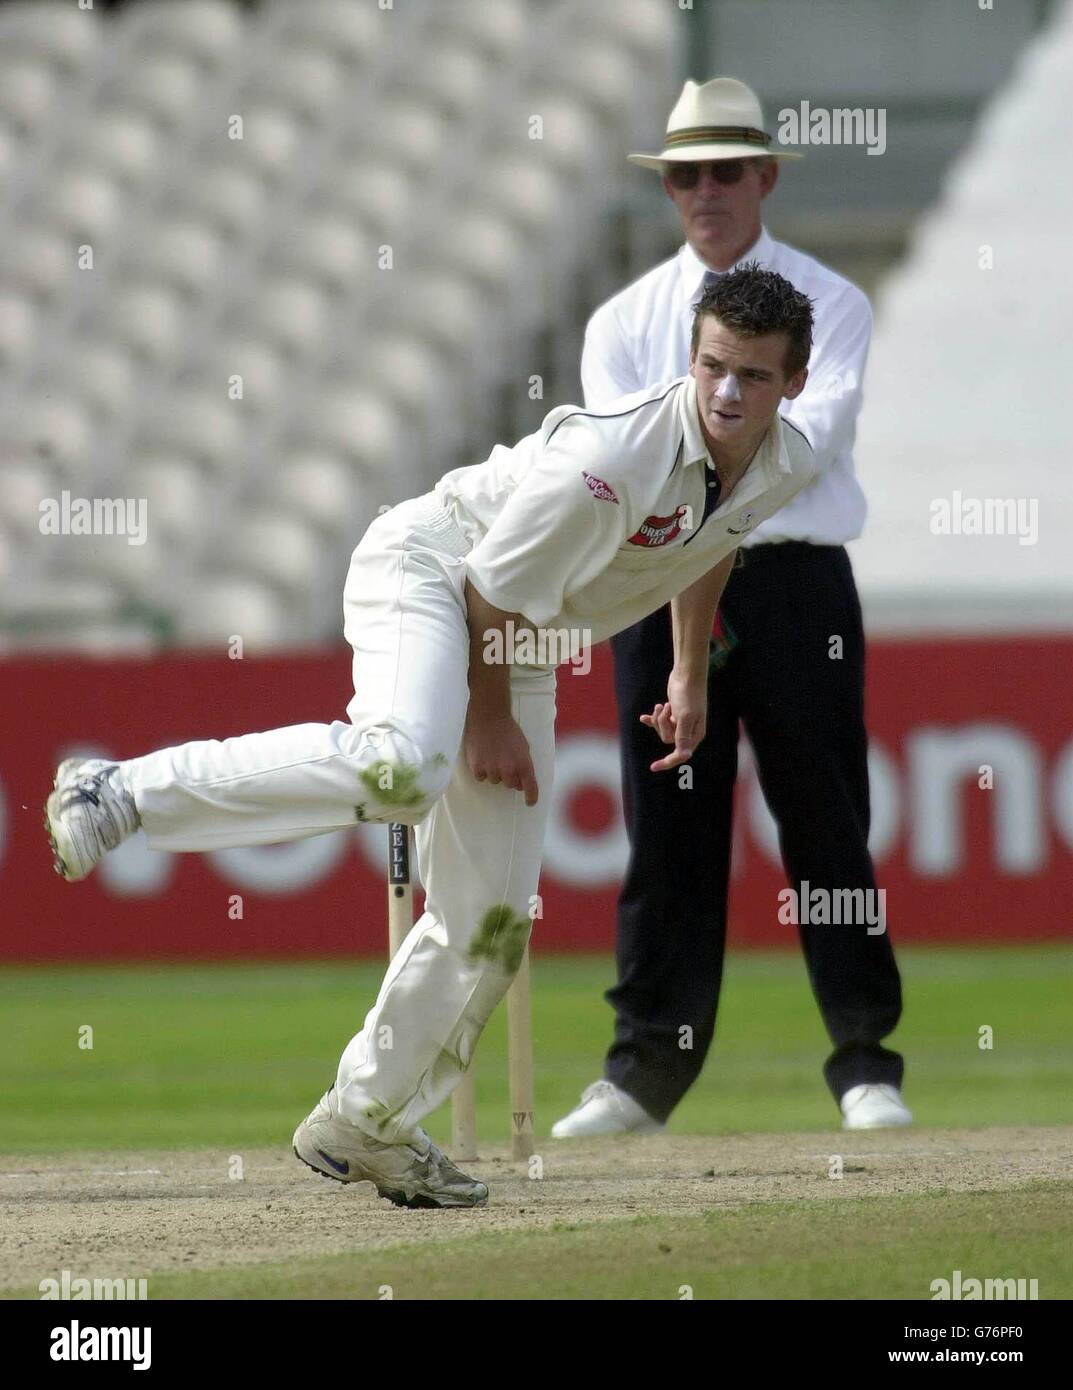 Yorkshire's 17 year old bowling prospect Nick Thornicroft on his debut for his county against Lancashire during their Frizzell County Championship Division One match at Old Trafford Manchester. Stock Photo